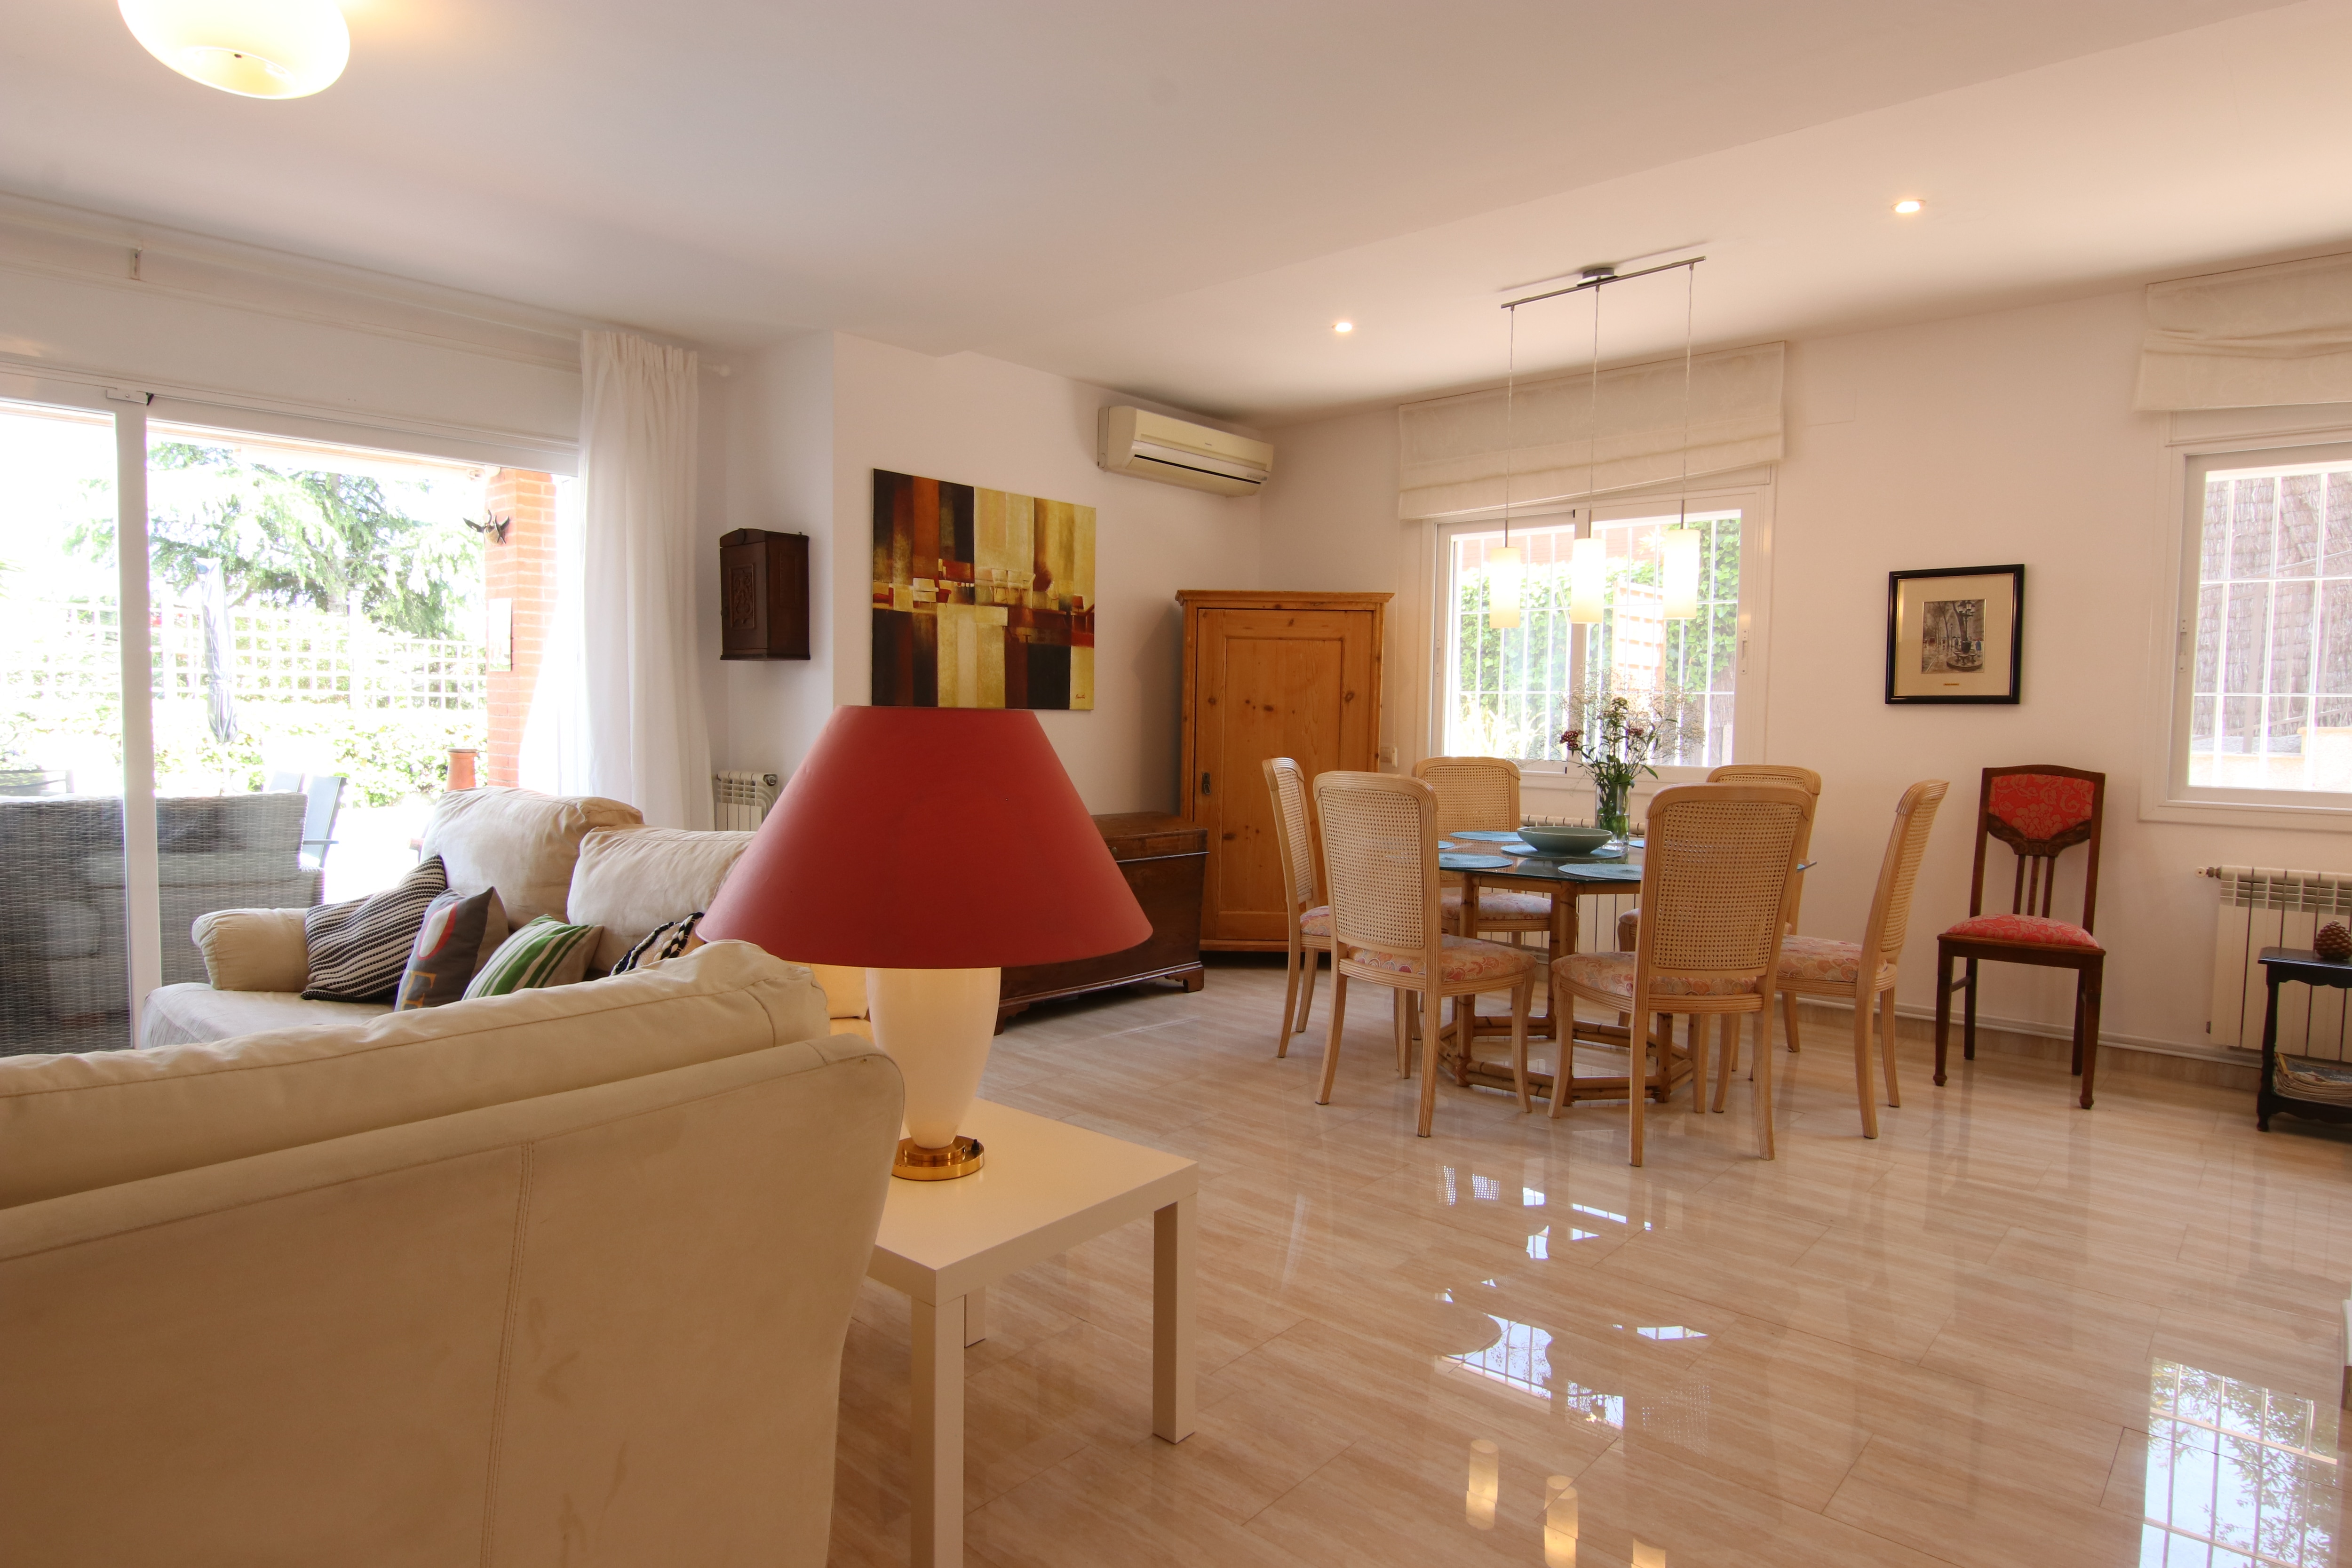 Property Image 2 - Amazing Villa in Arenys de Mar with pool & gym